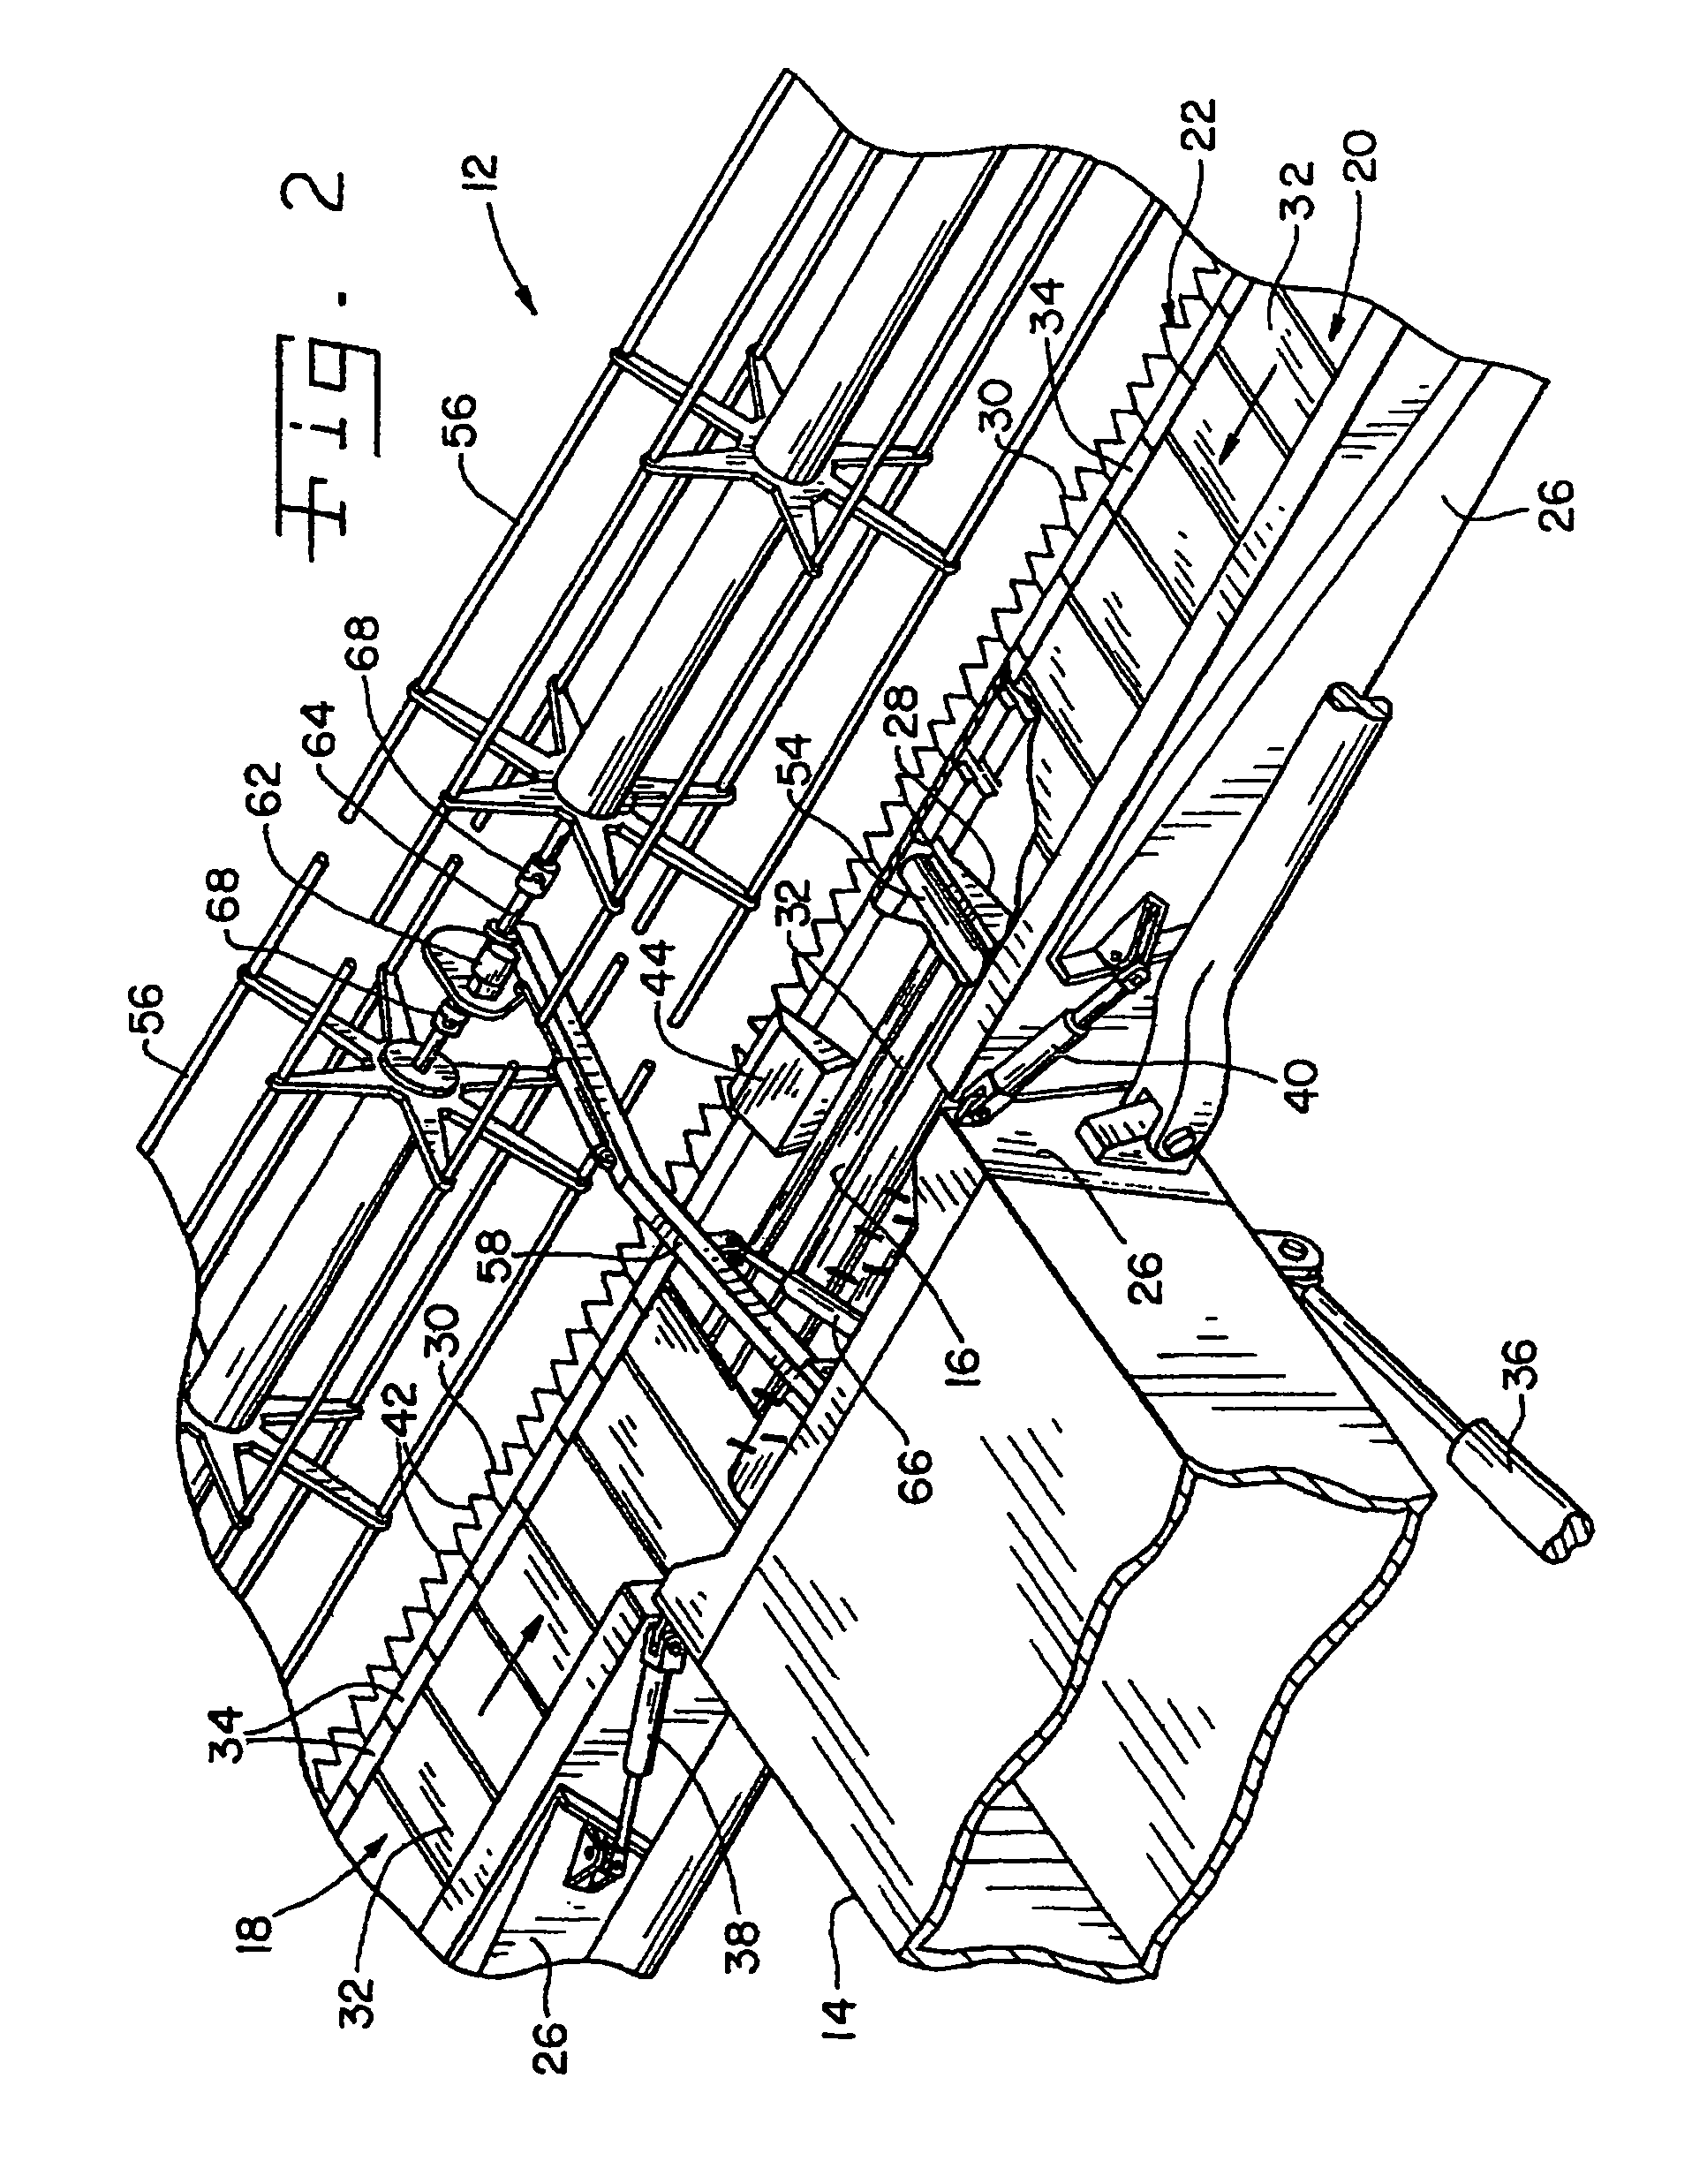 Flexible cutting platform with passive float arm stop in an agricultural harvesting machine